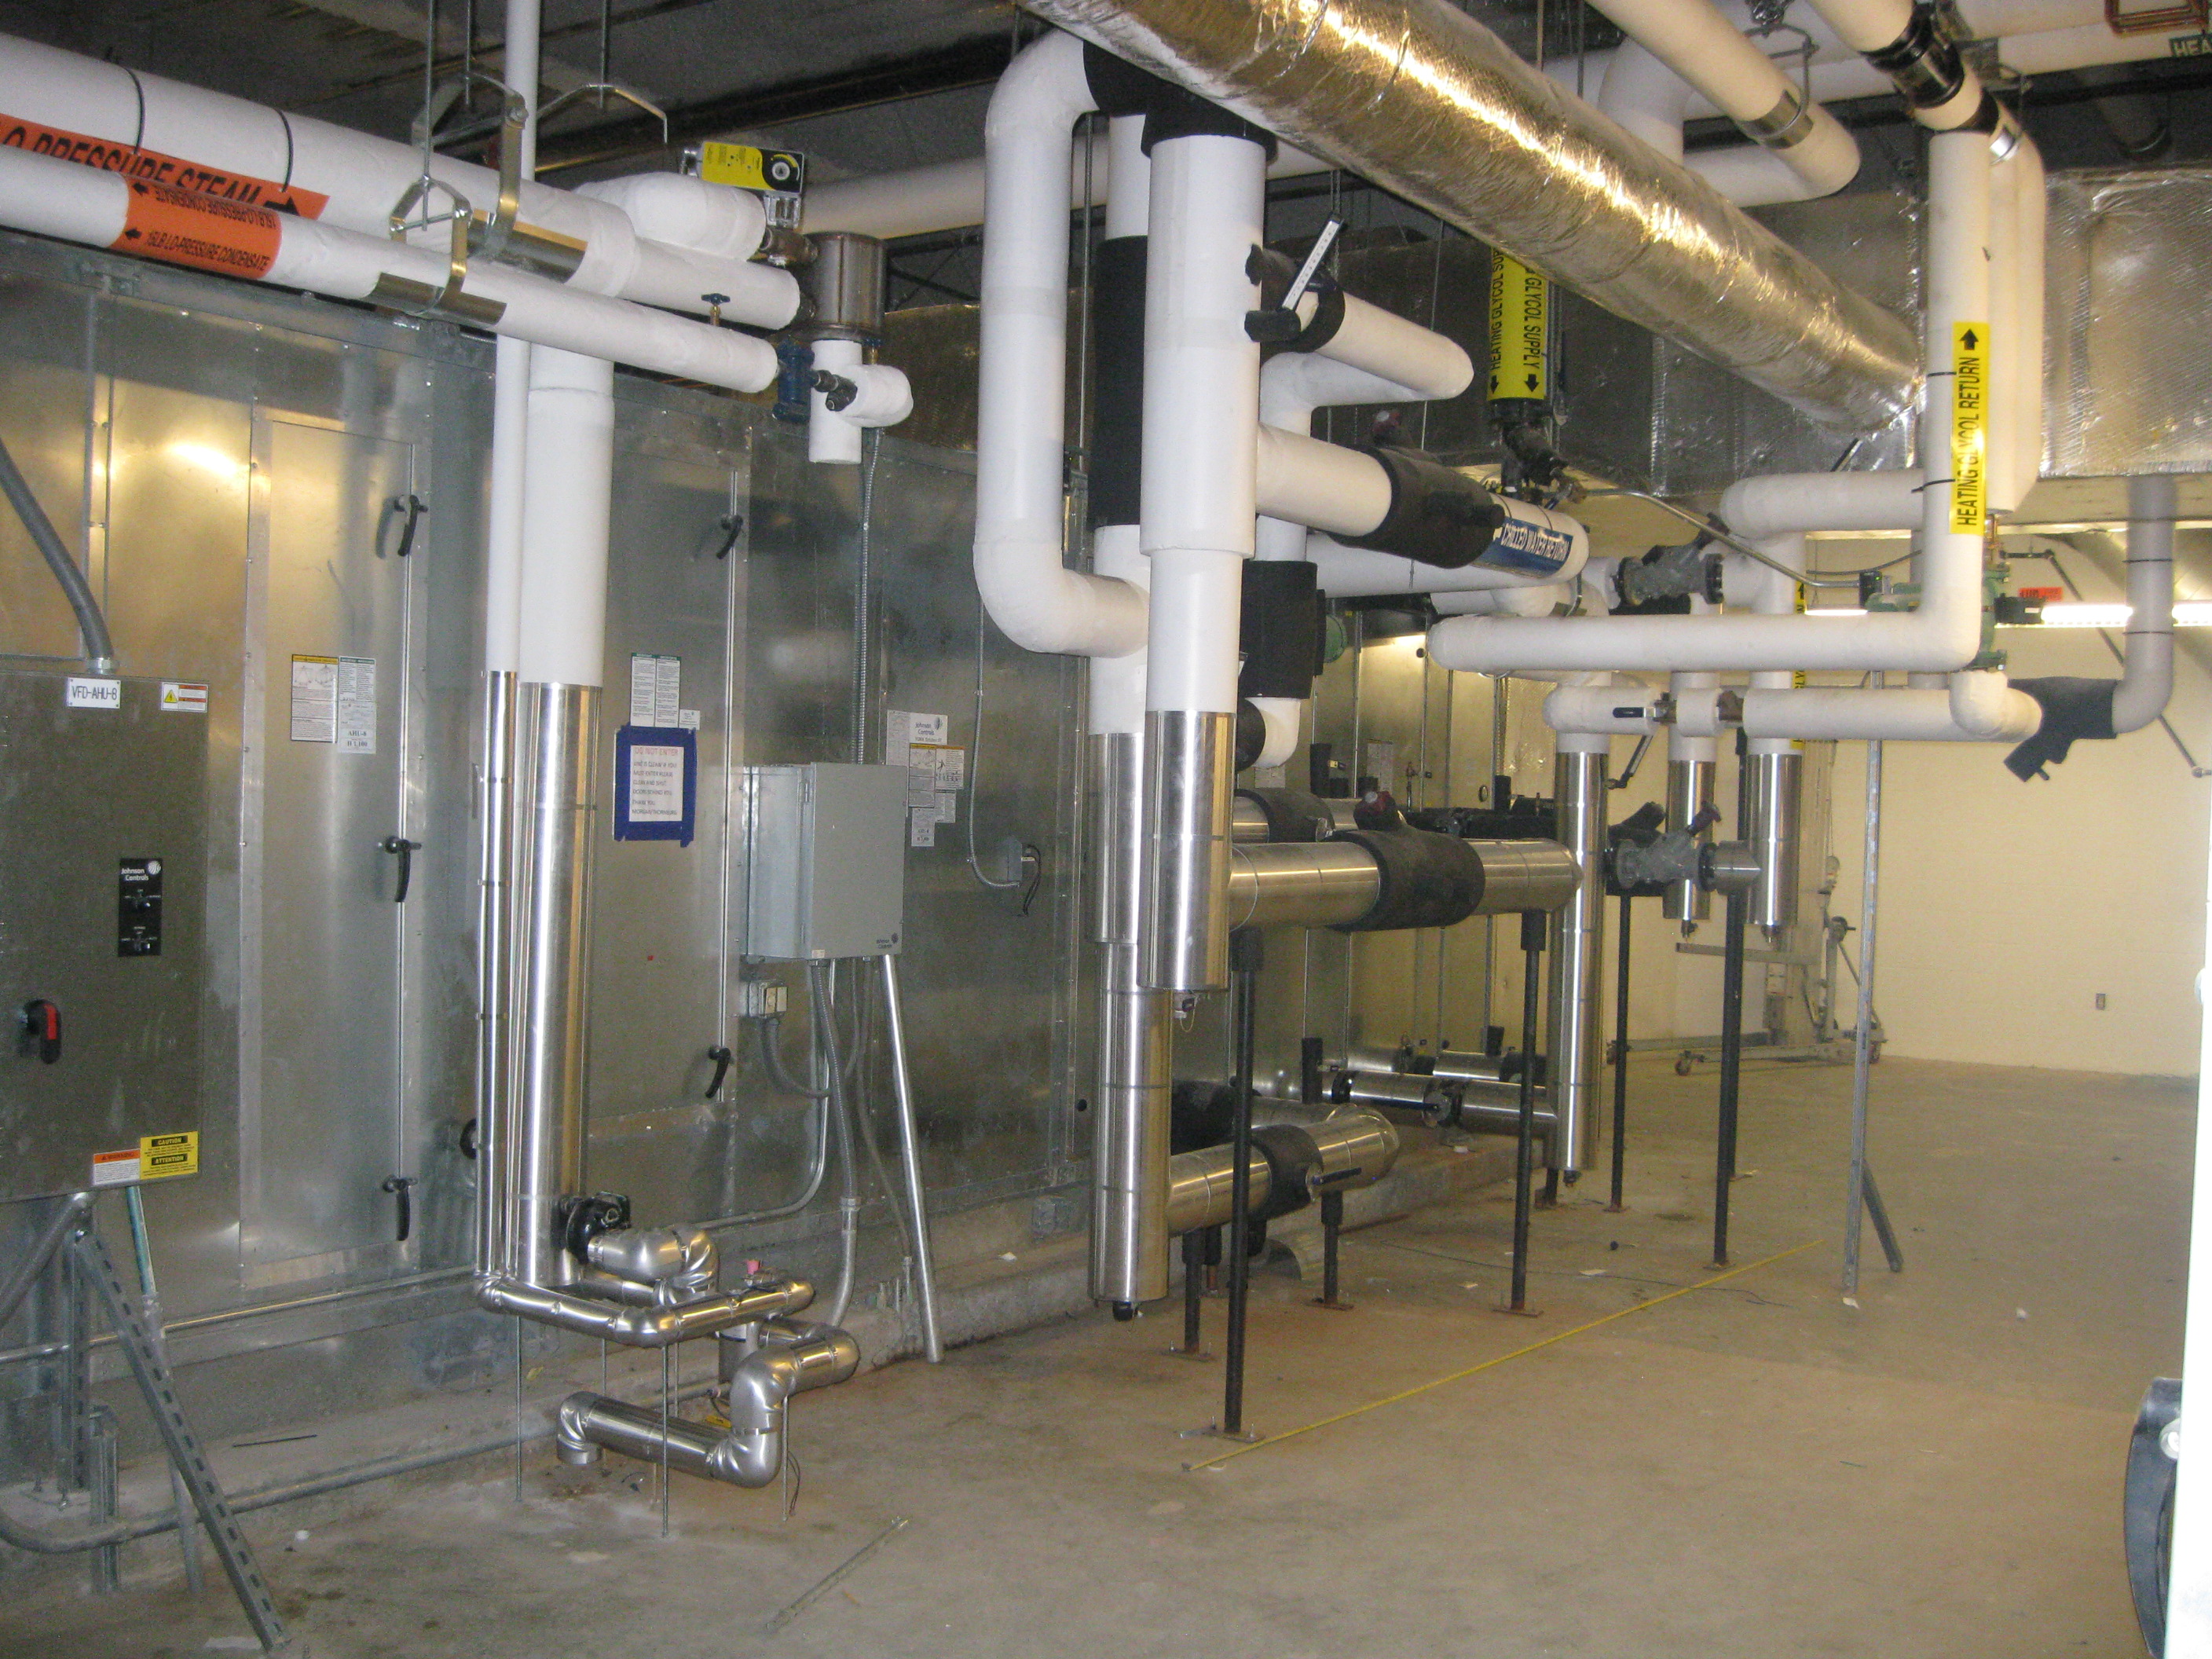 Air Handler at University of Tennessee Translational Sciences Research